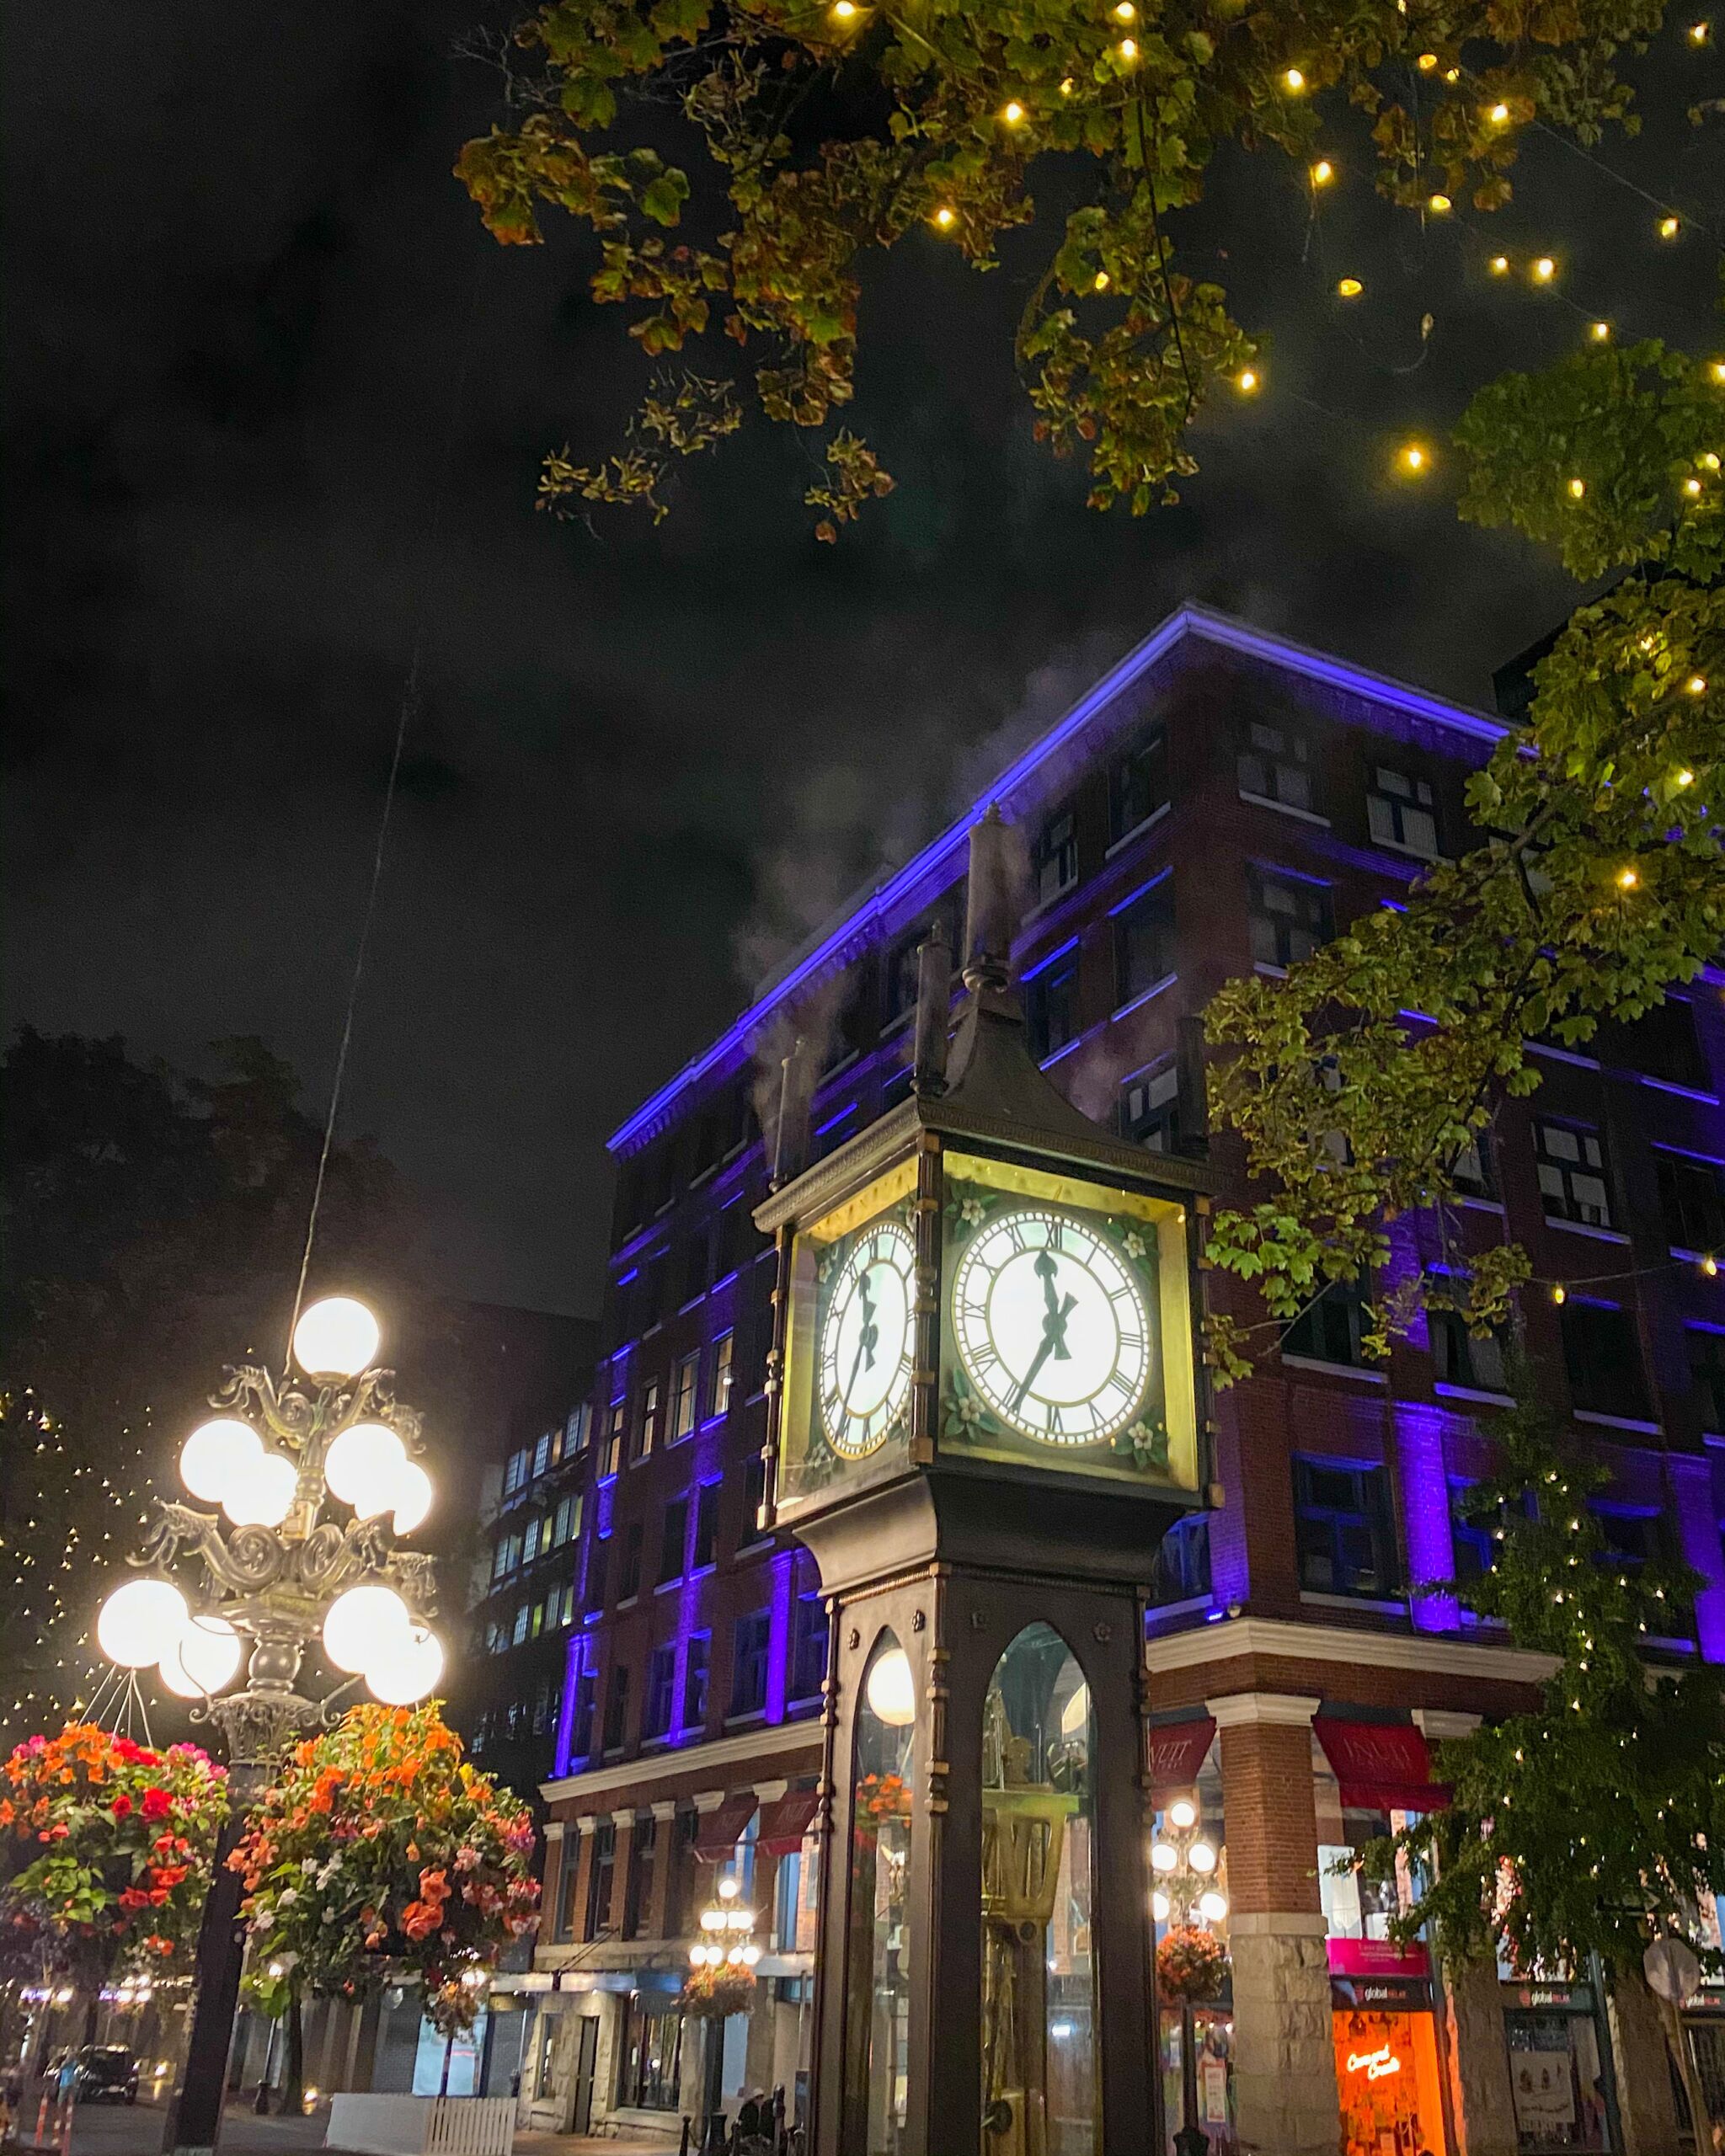 The Gastown steam clock in Vancouver